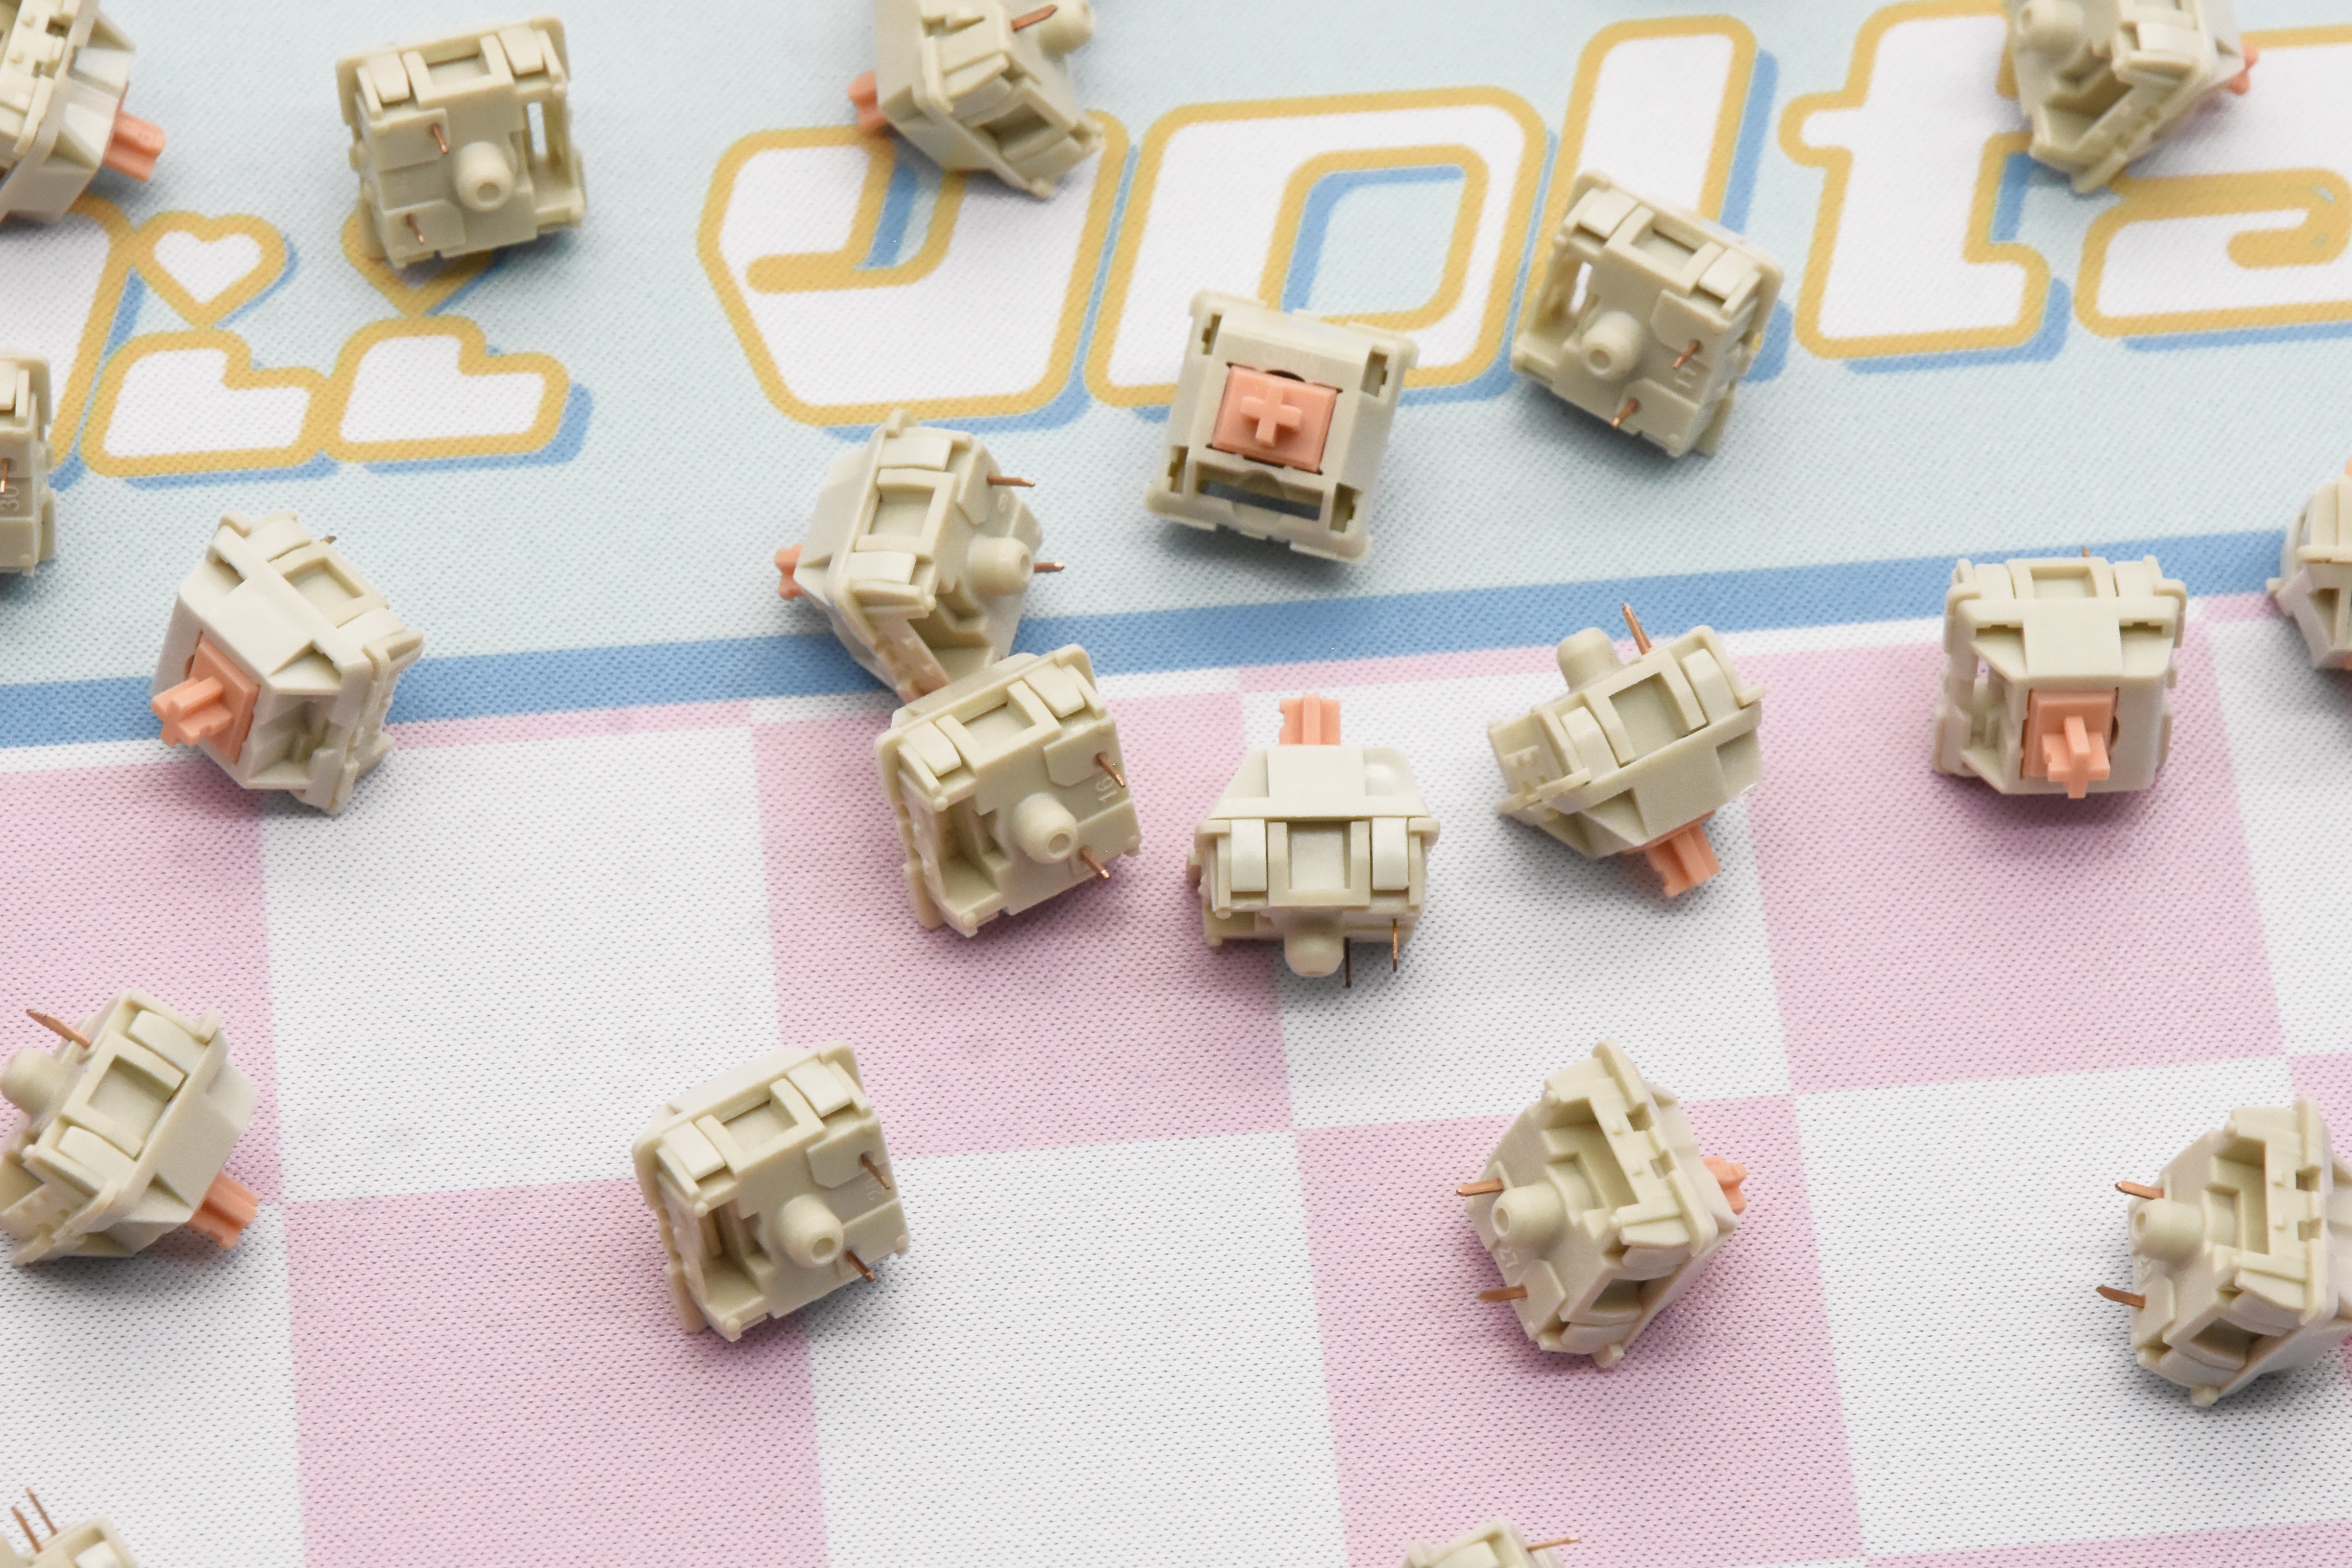 MMD HOLY PANDA V3 TACTILE SWITCH FACTORY LUBED EDITION (10PCS)